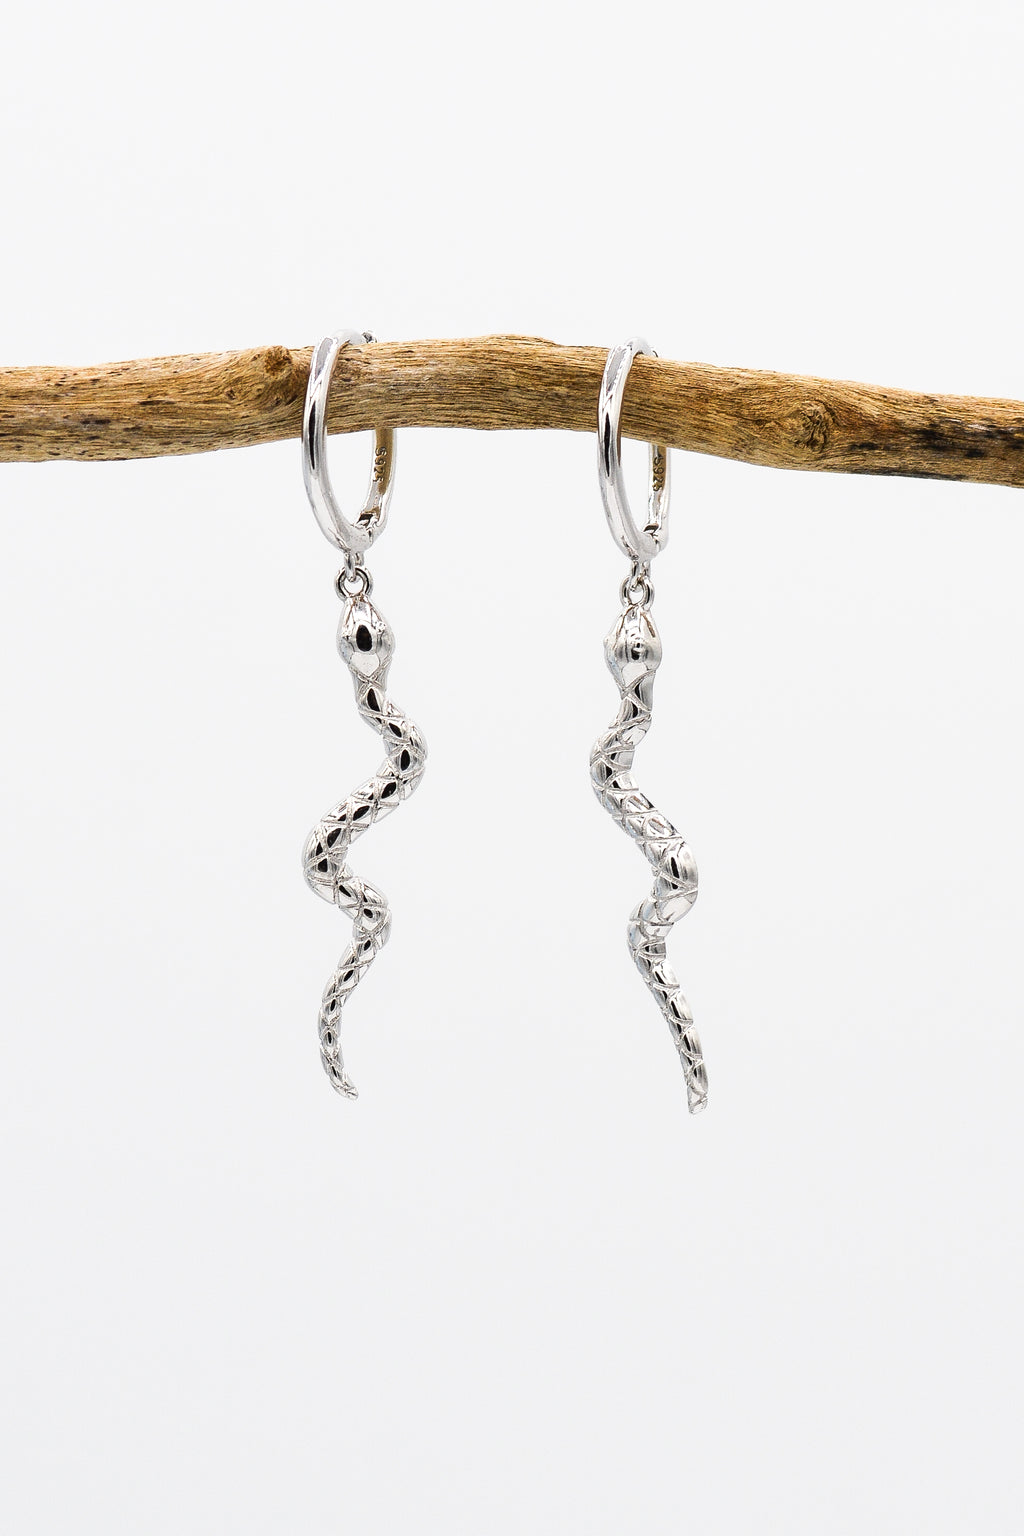 Picture of the Tahil earrings, a Nelumbo jewelry piece, handmade from 925 sterling silver